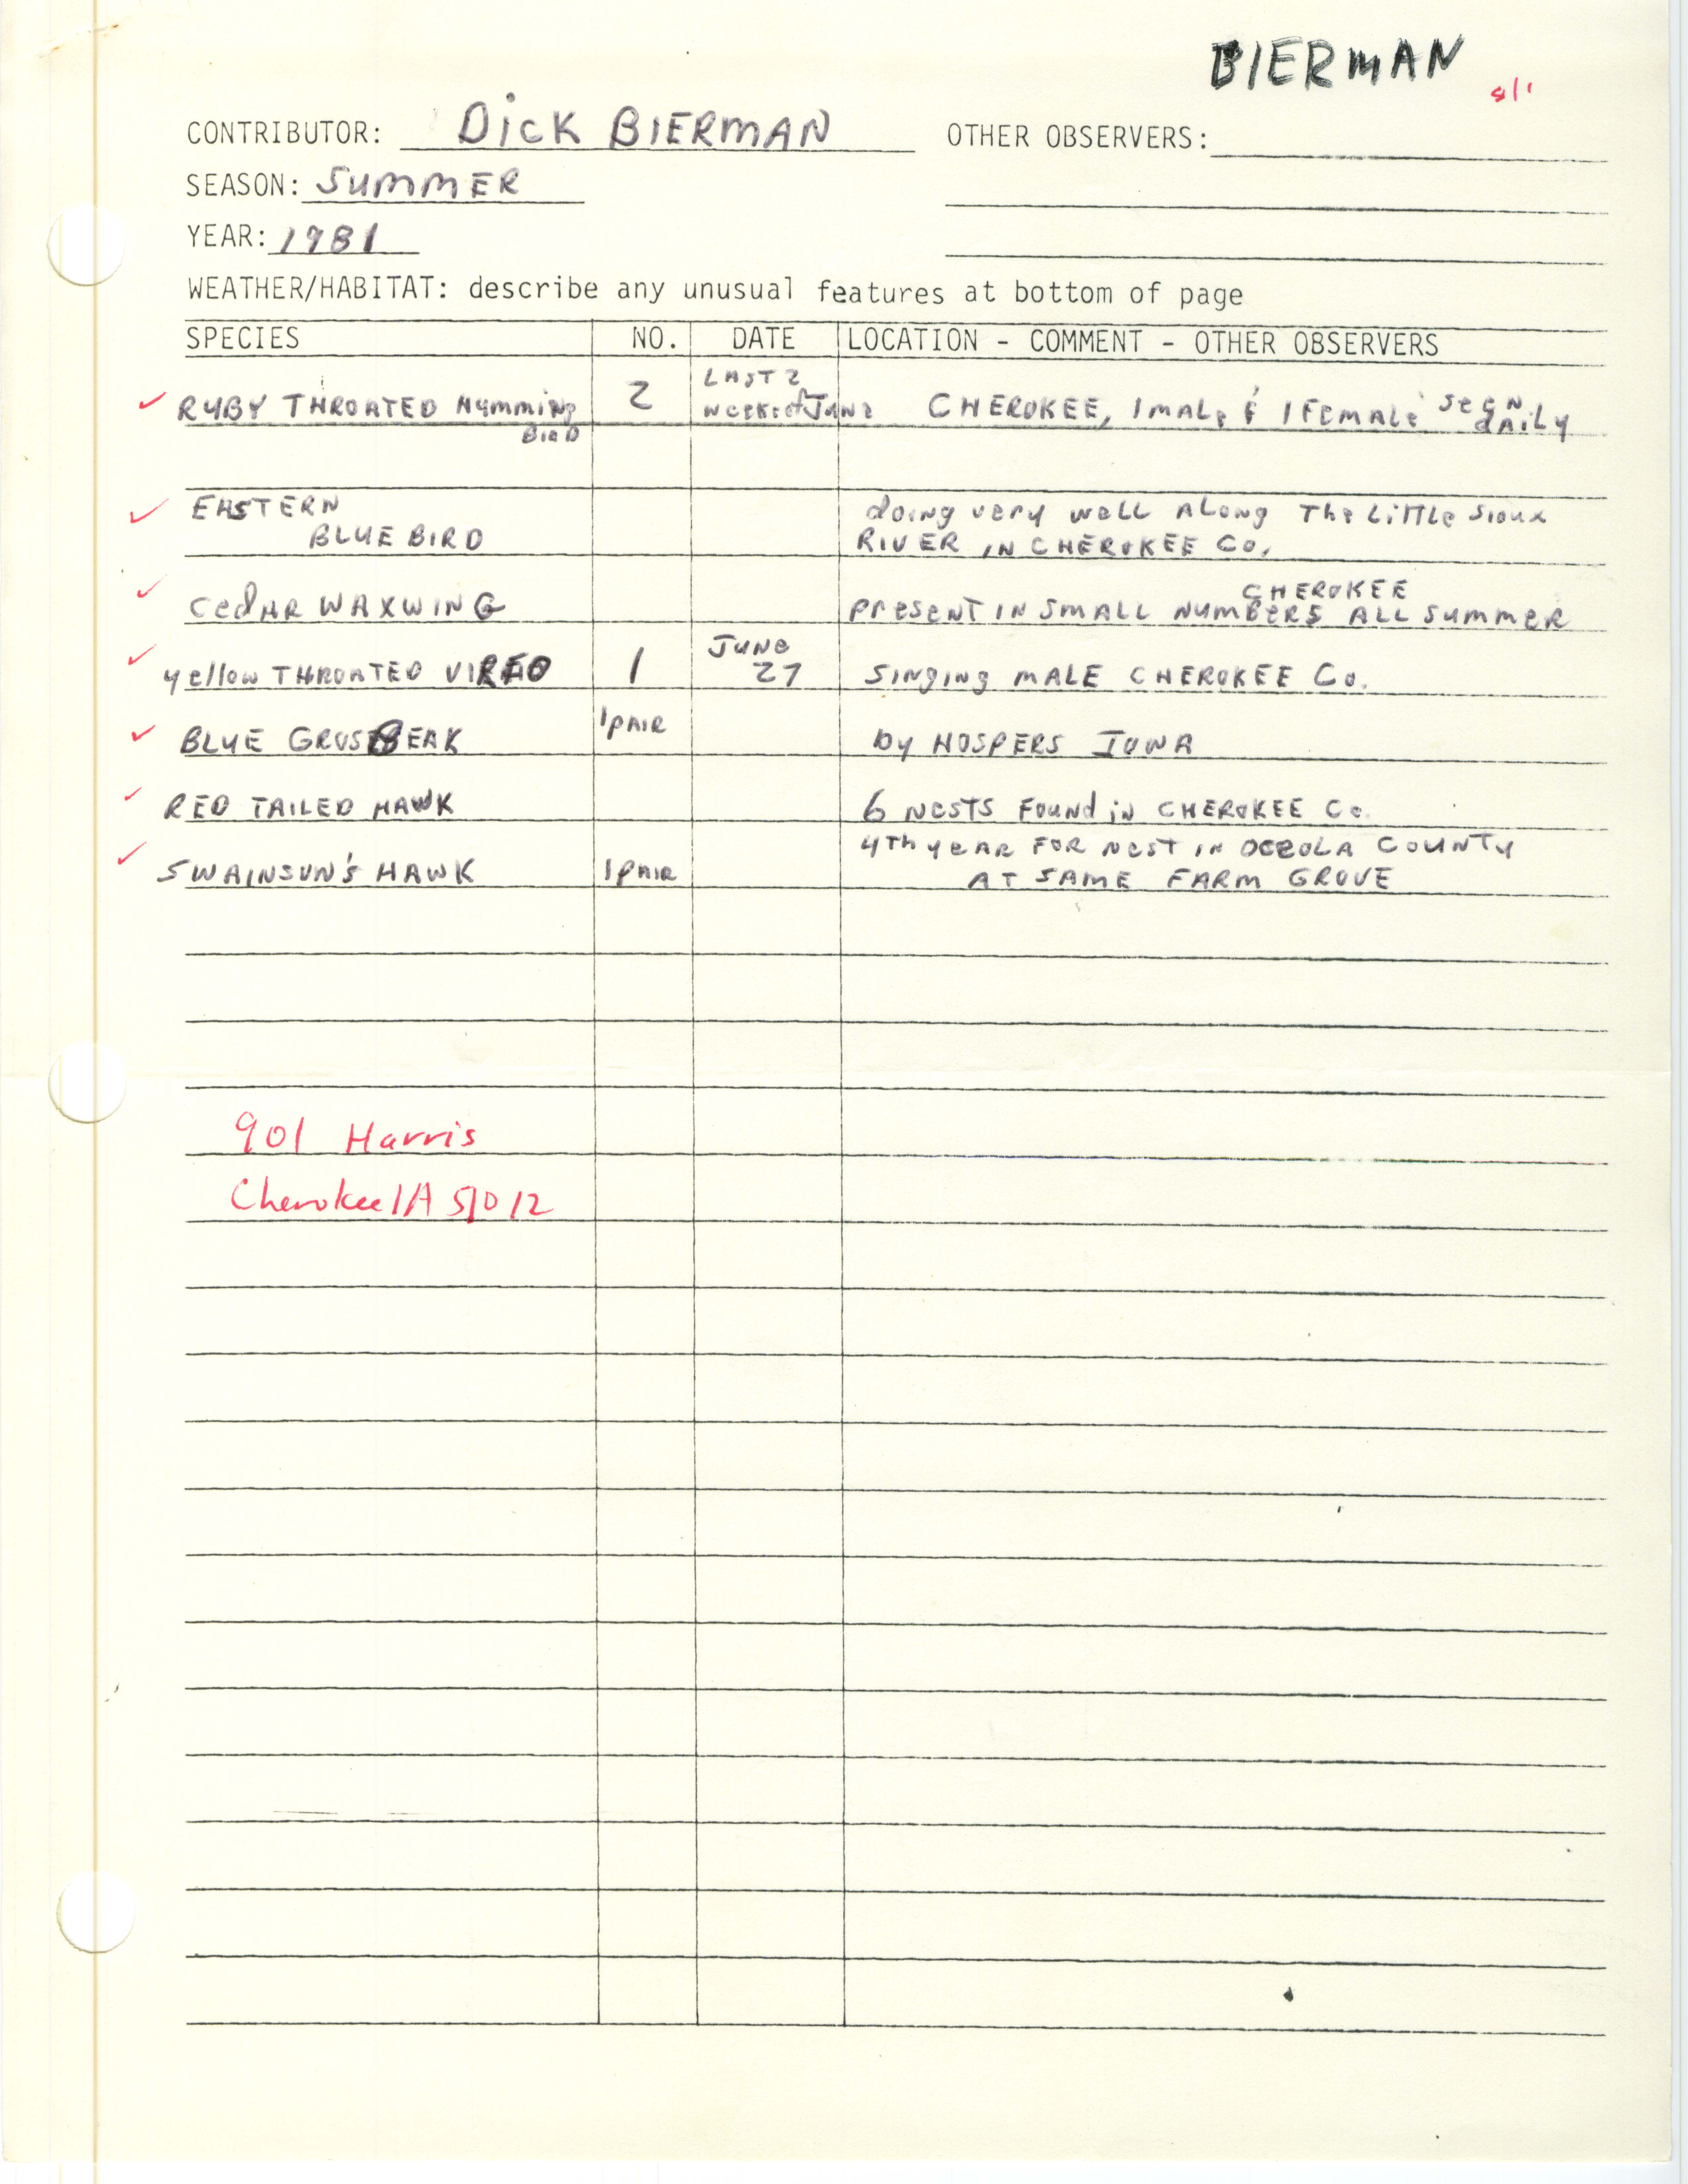 Field notes contributed by Dick Bierman, summer 1981